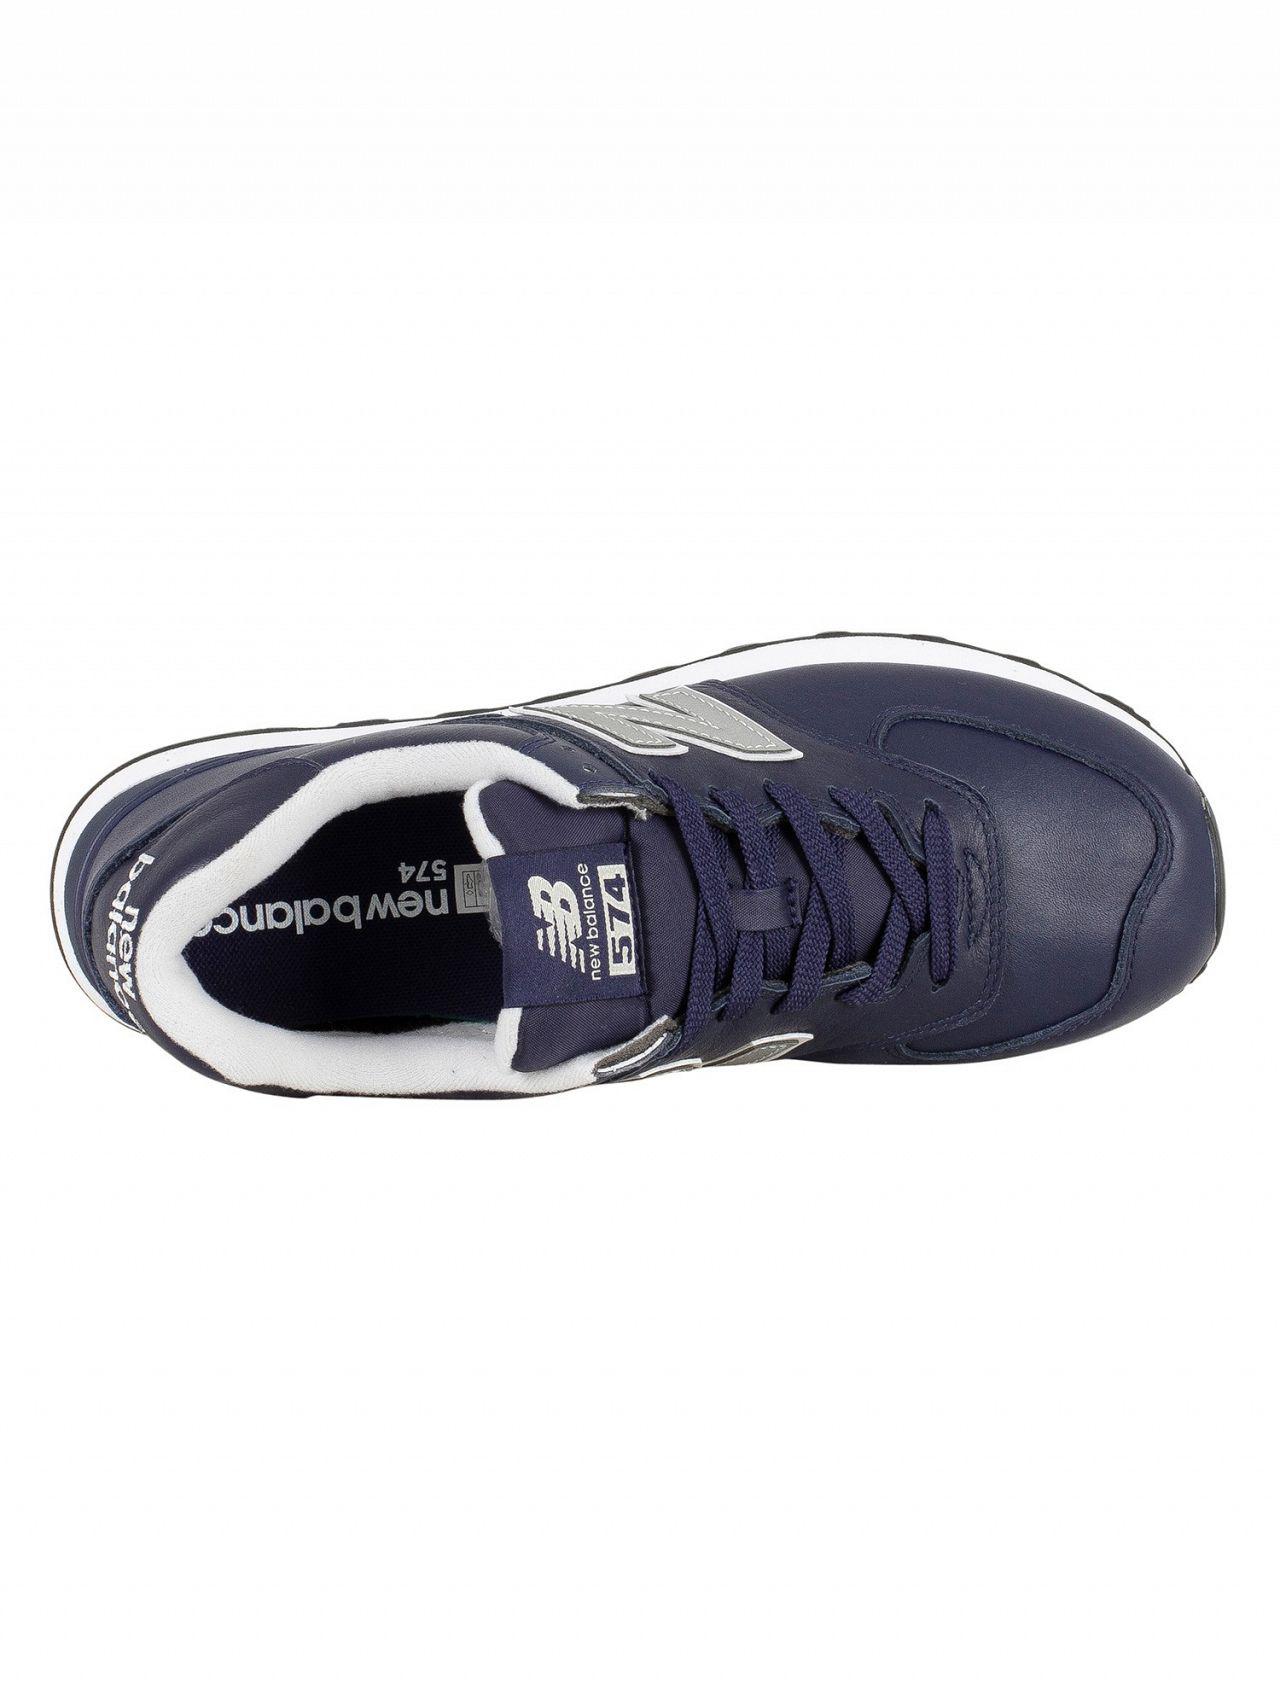 New Balance Navy 574 Leather Trainers in Blue for Men - Lyst